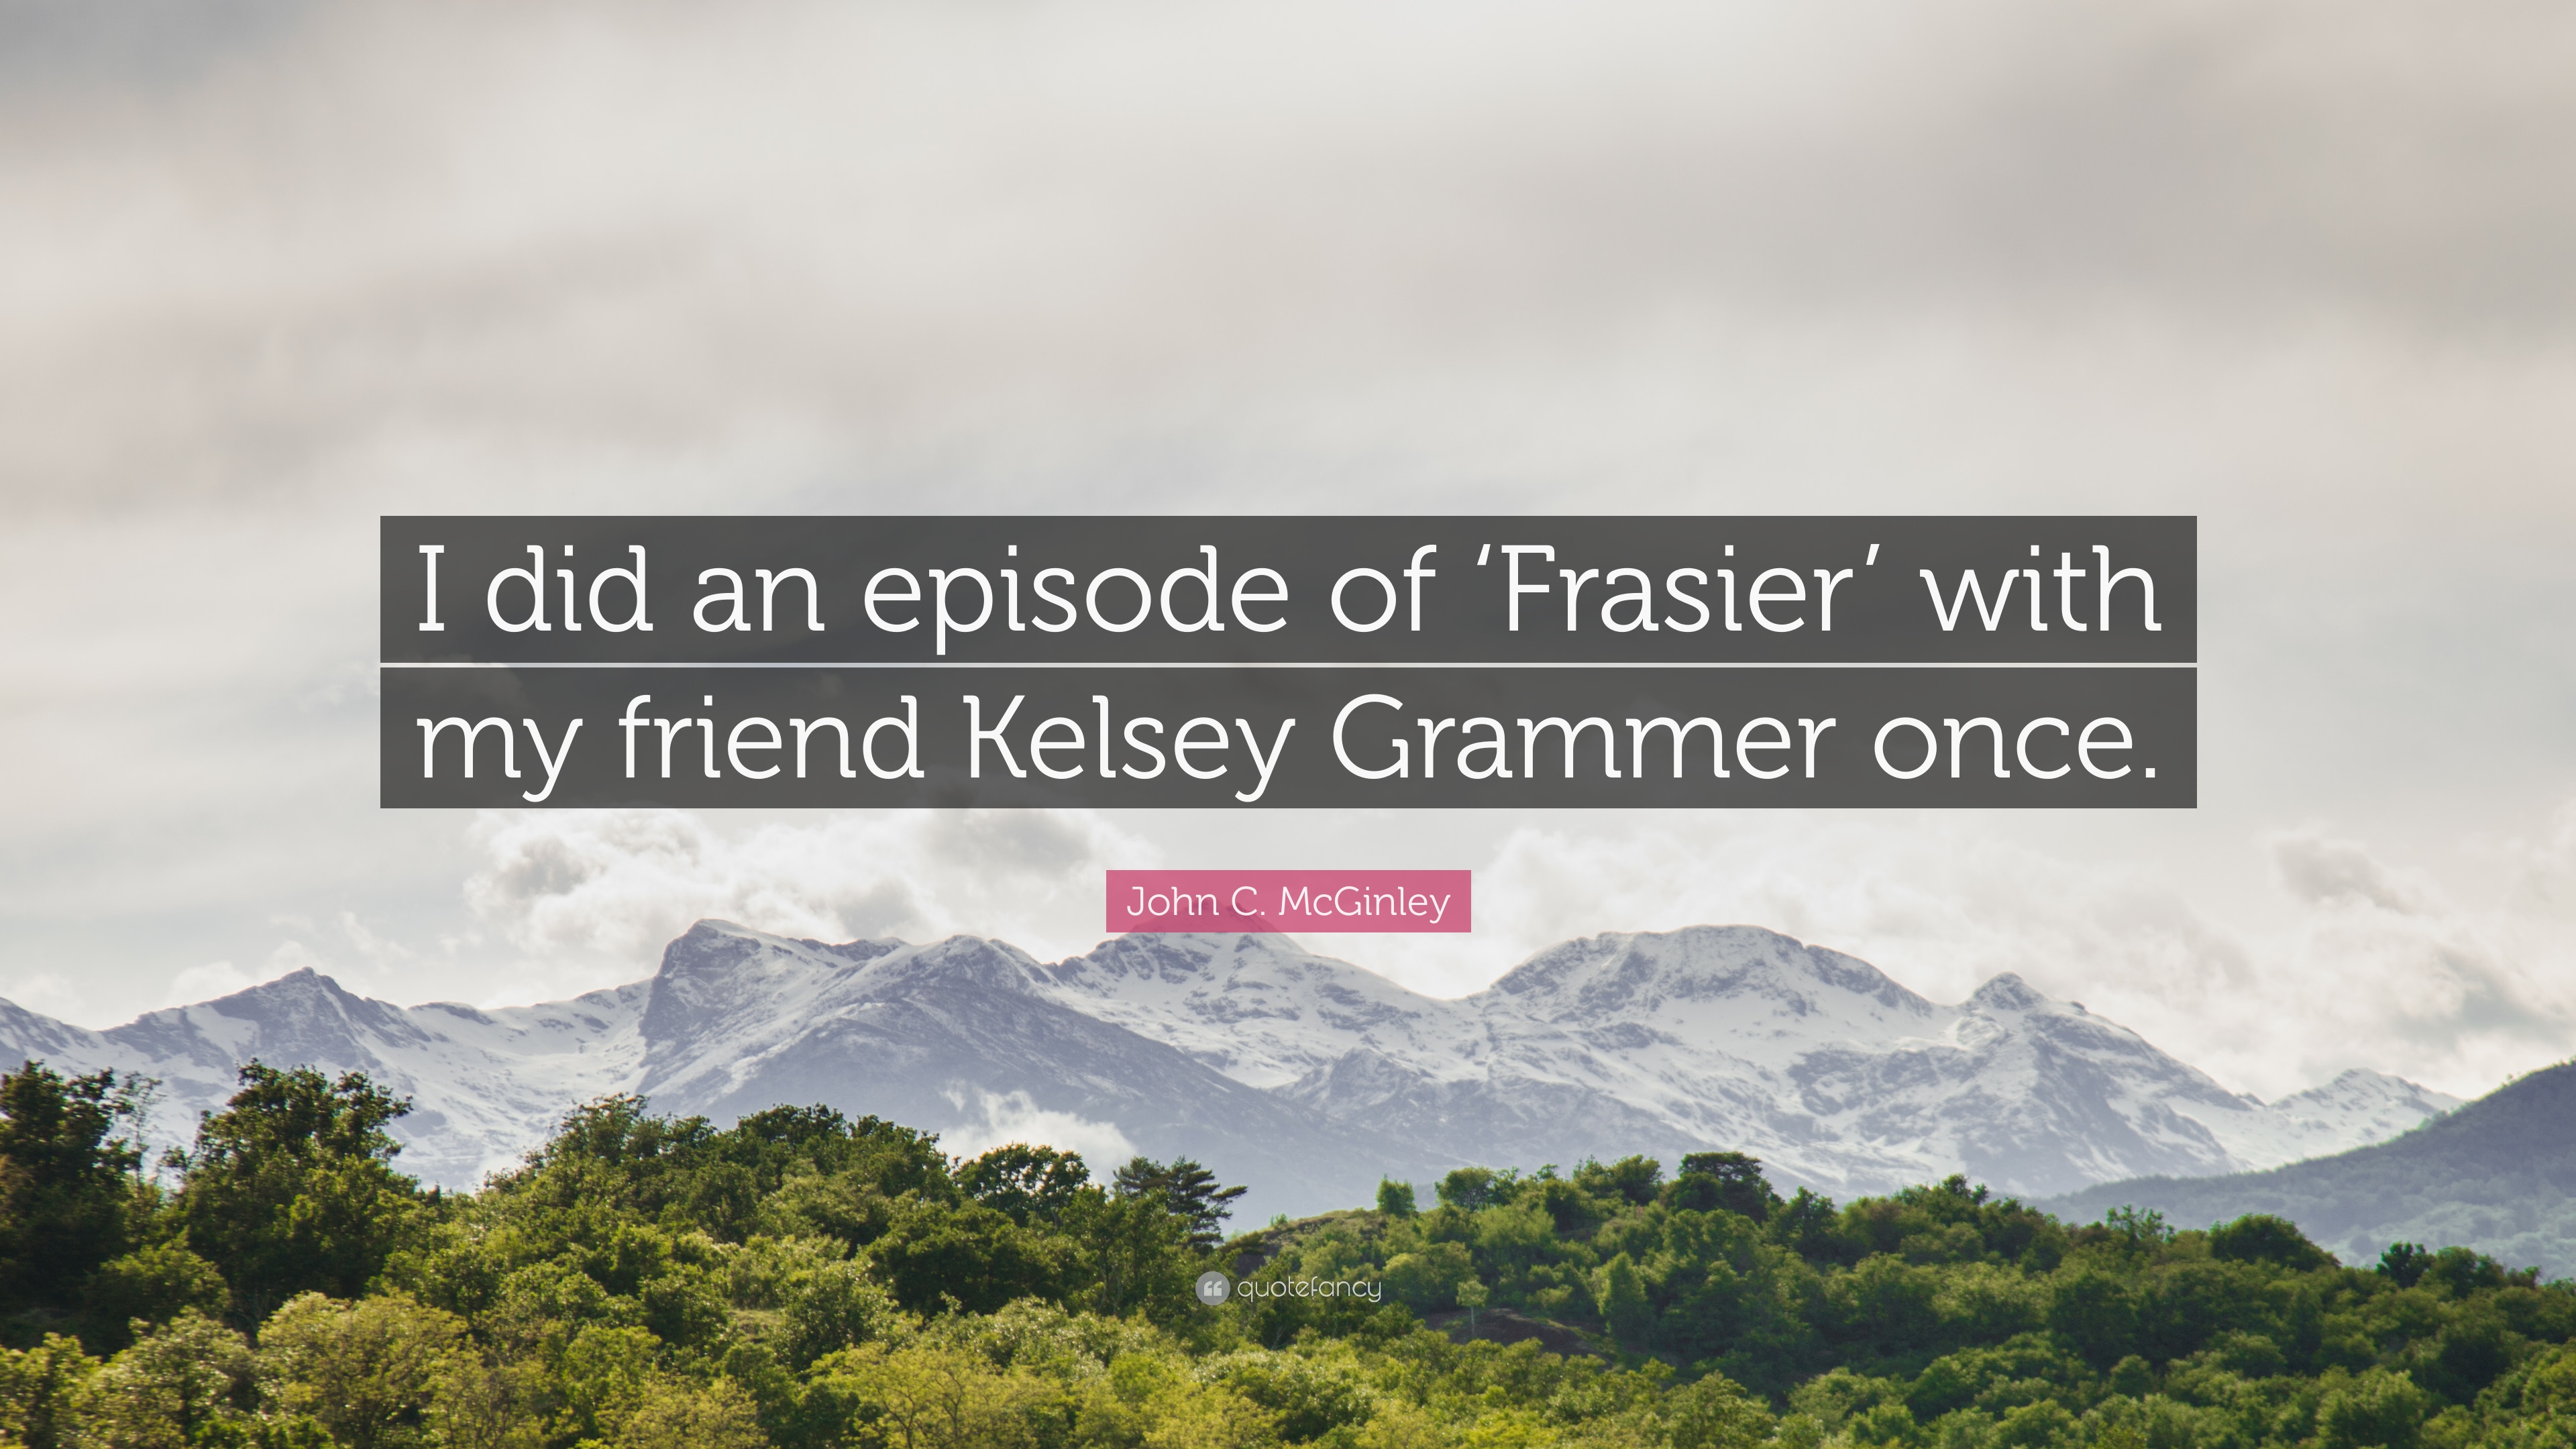 John C. McGinley Quote: “I did an episode of 'Frasier' with my